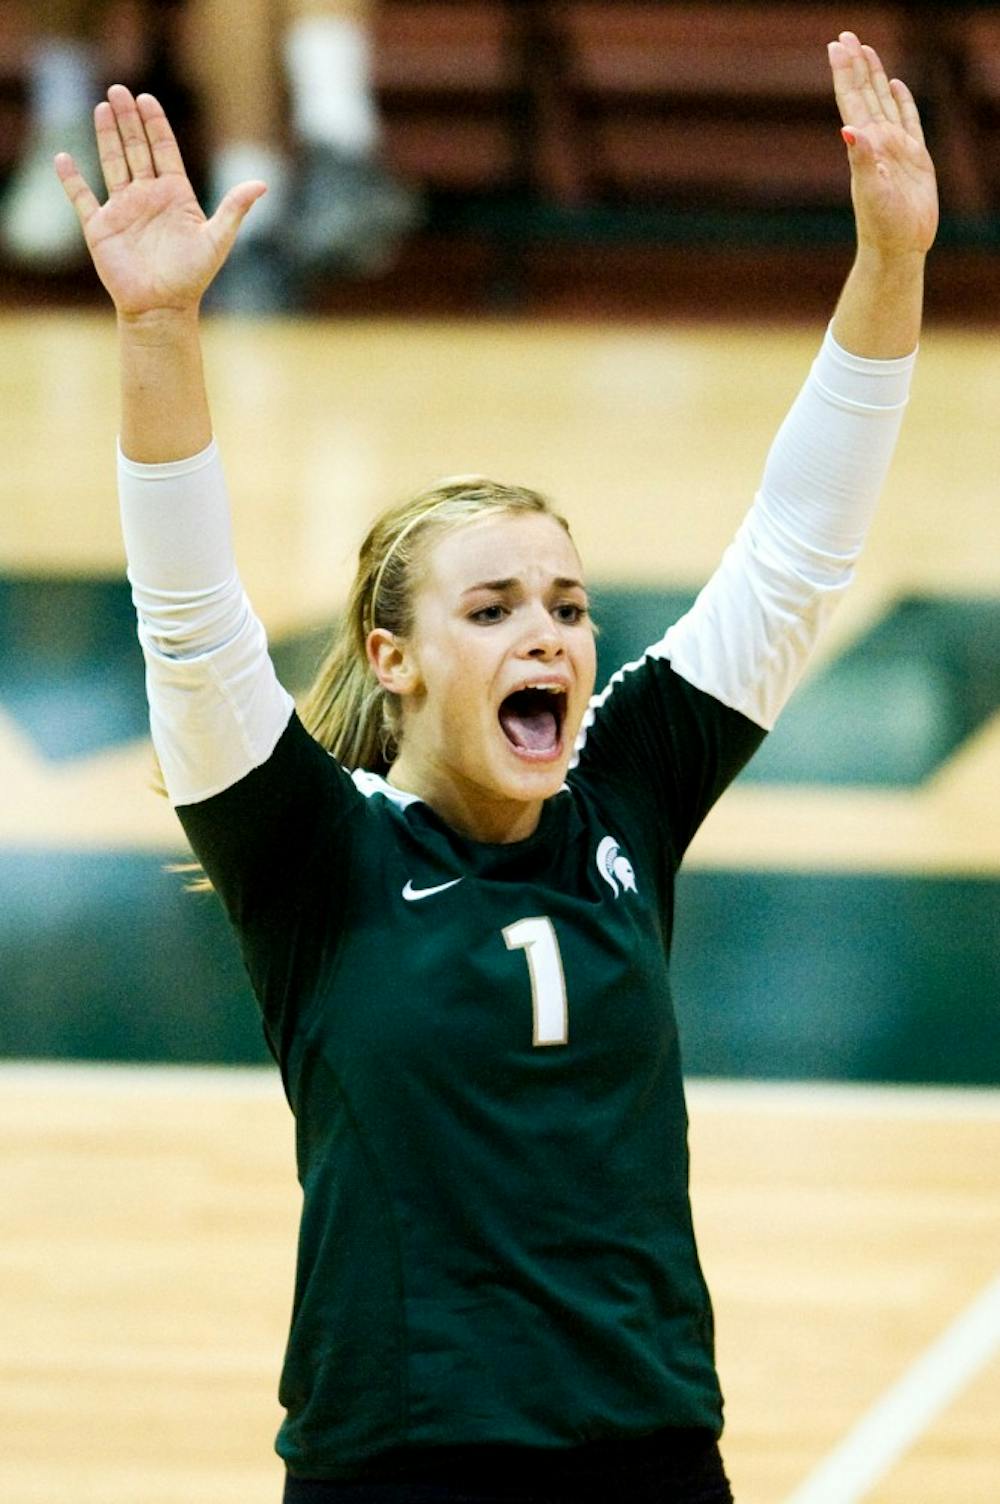 Freshman defensive specialist Kori Moster celebrates a point during Saturday's game against Minnesota at Jenison Field House. Moster posted a career-best of 24 digs. Lauren Wood/The State News